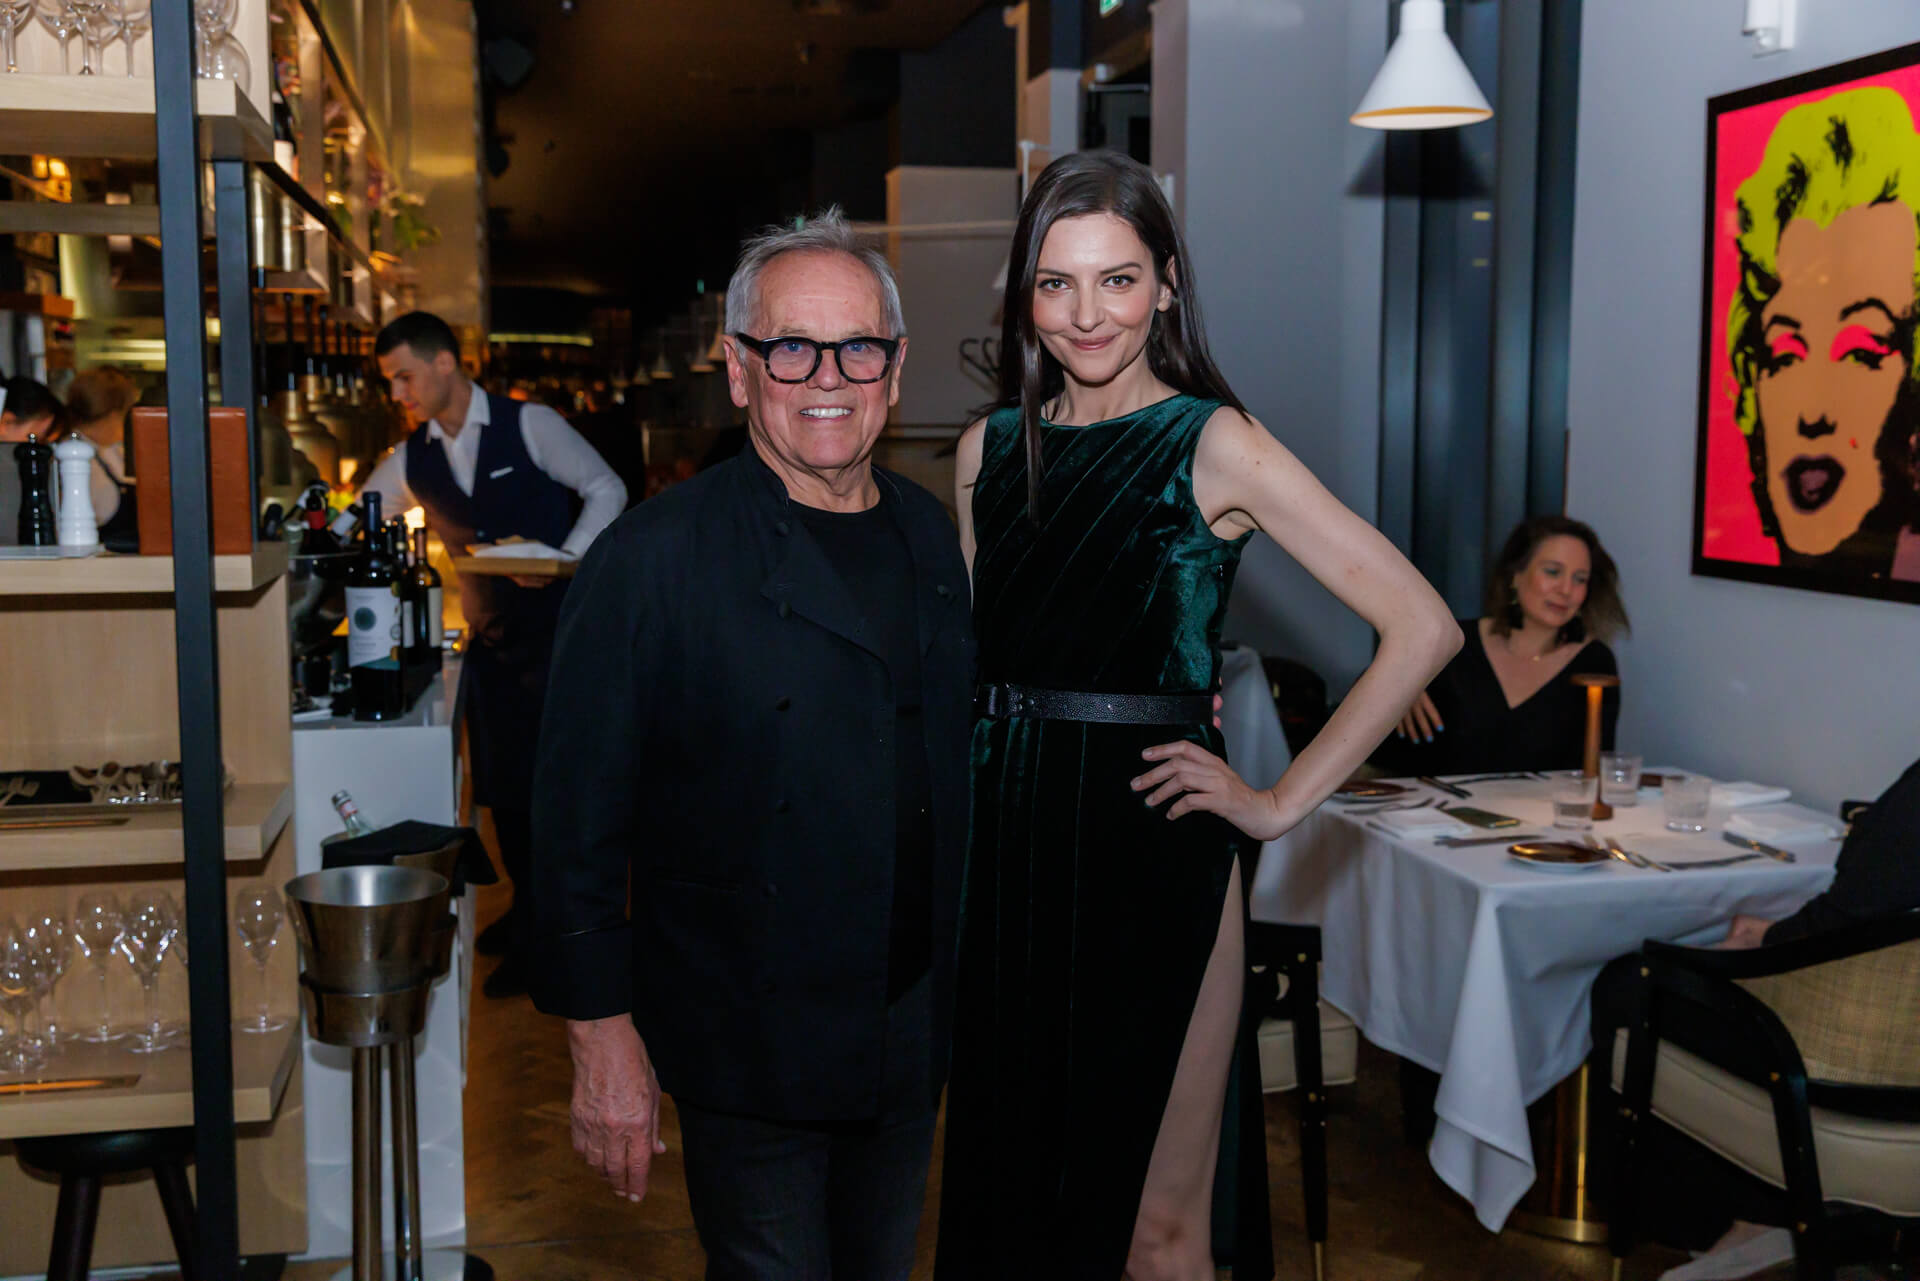 Wolfgang Puck Hosts Star-Studded Red Carpet Event at Spago Budapest